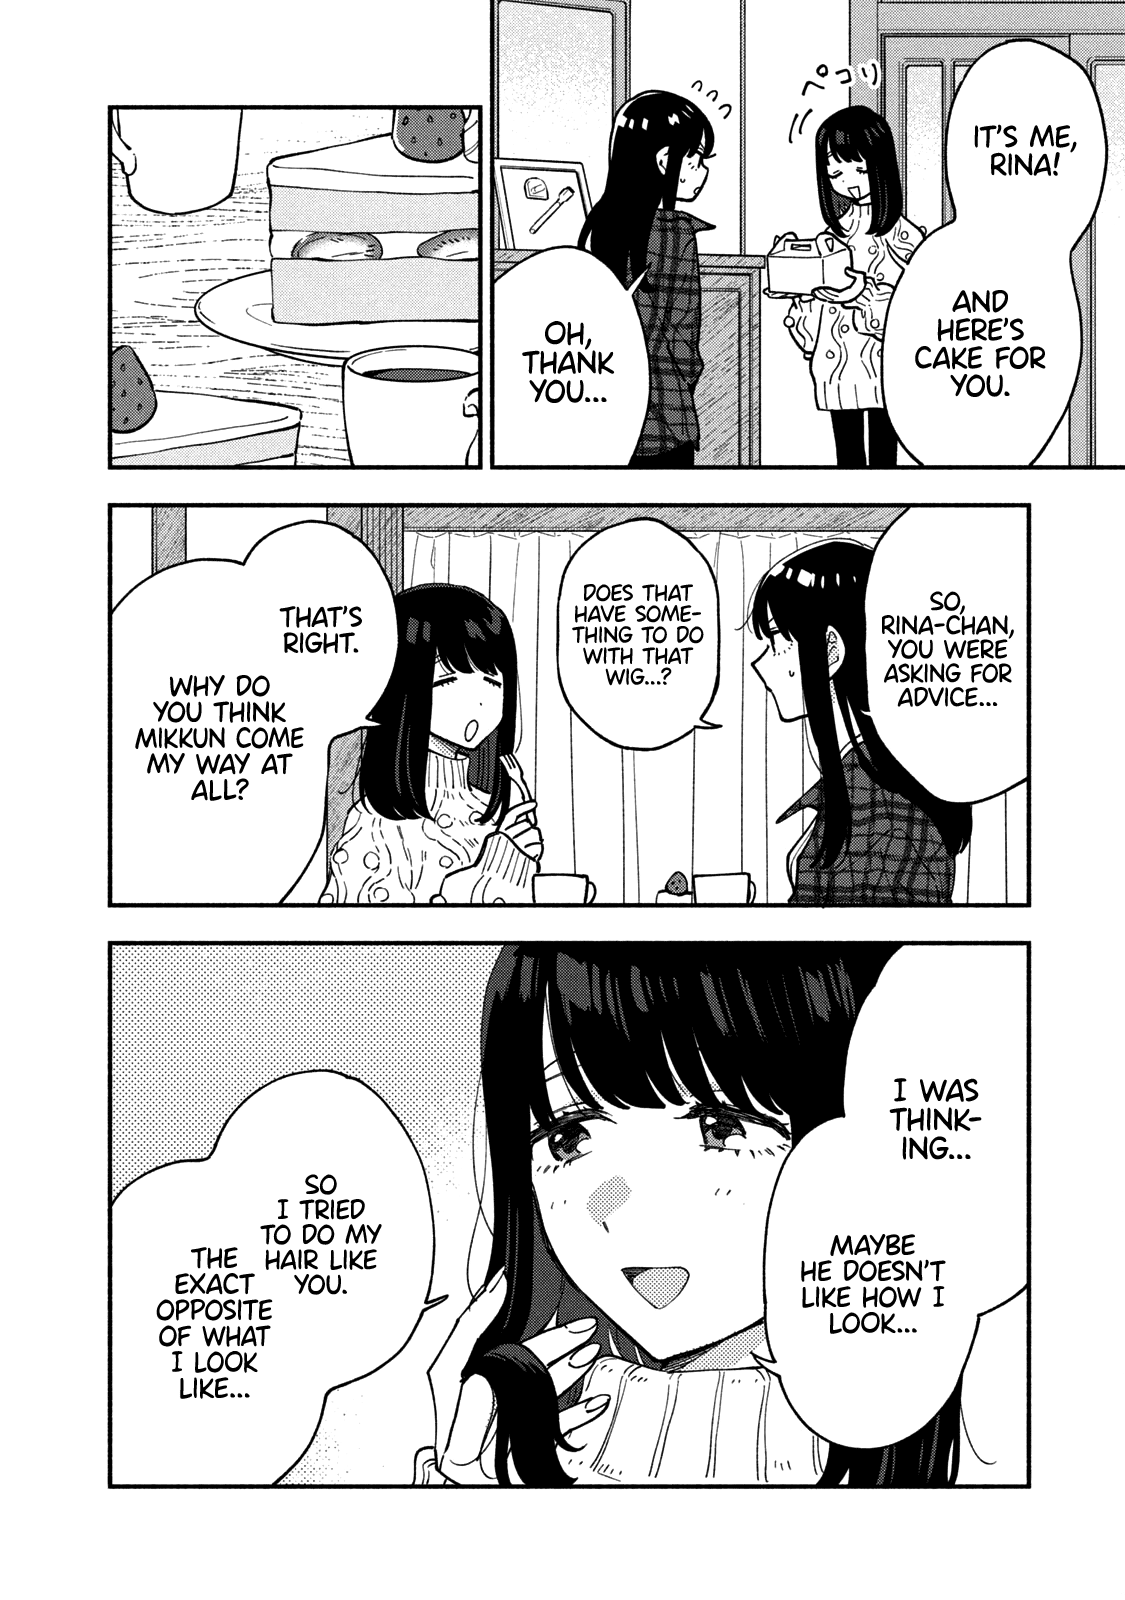 A Rare Marriage: How To Grill Our Love Chapter 57: Rina-Chan Wants Some Serious Love Advice! - Picture 3